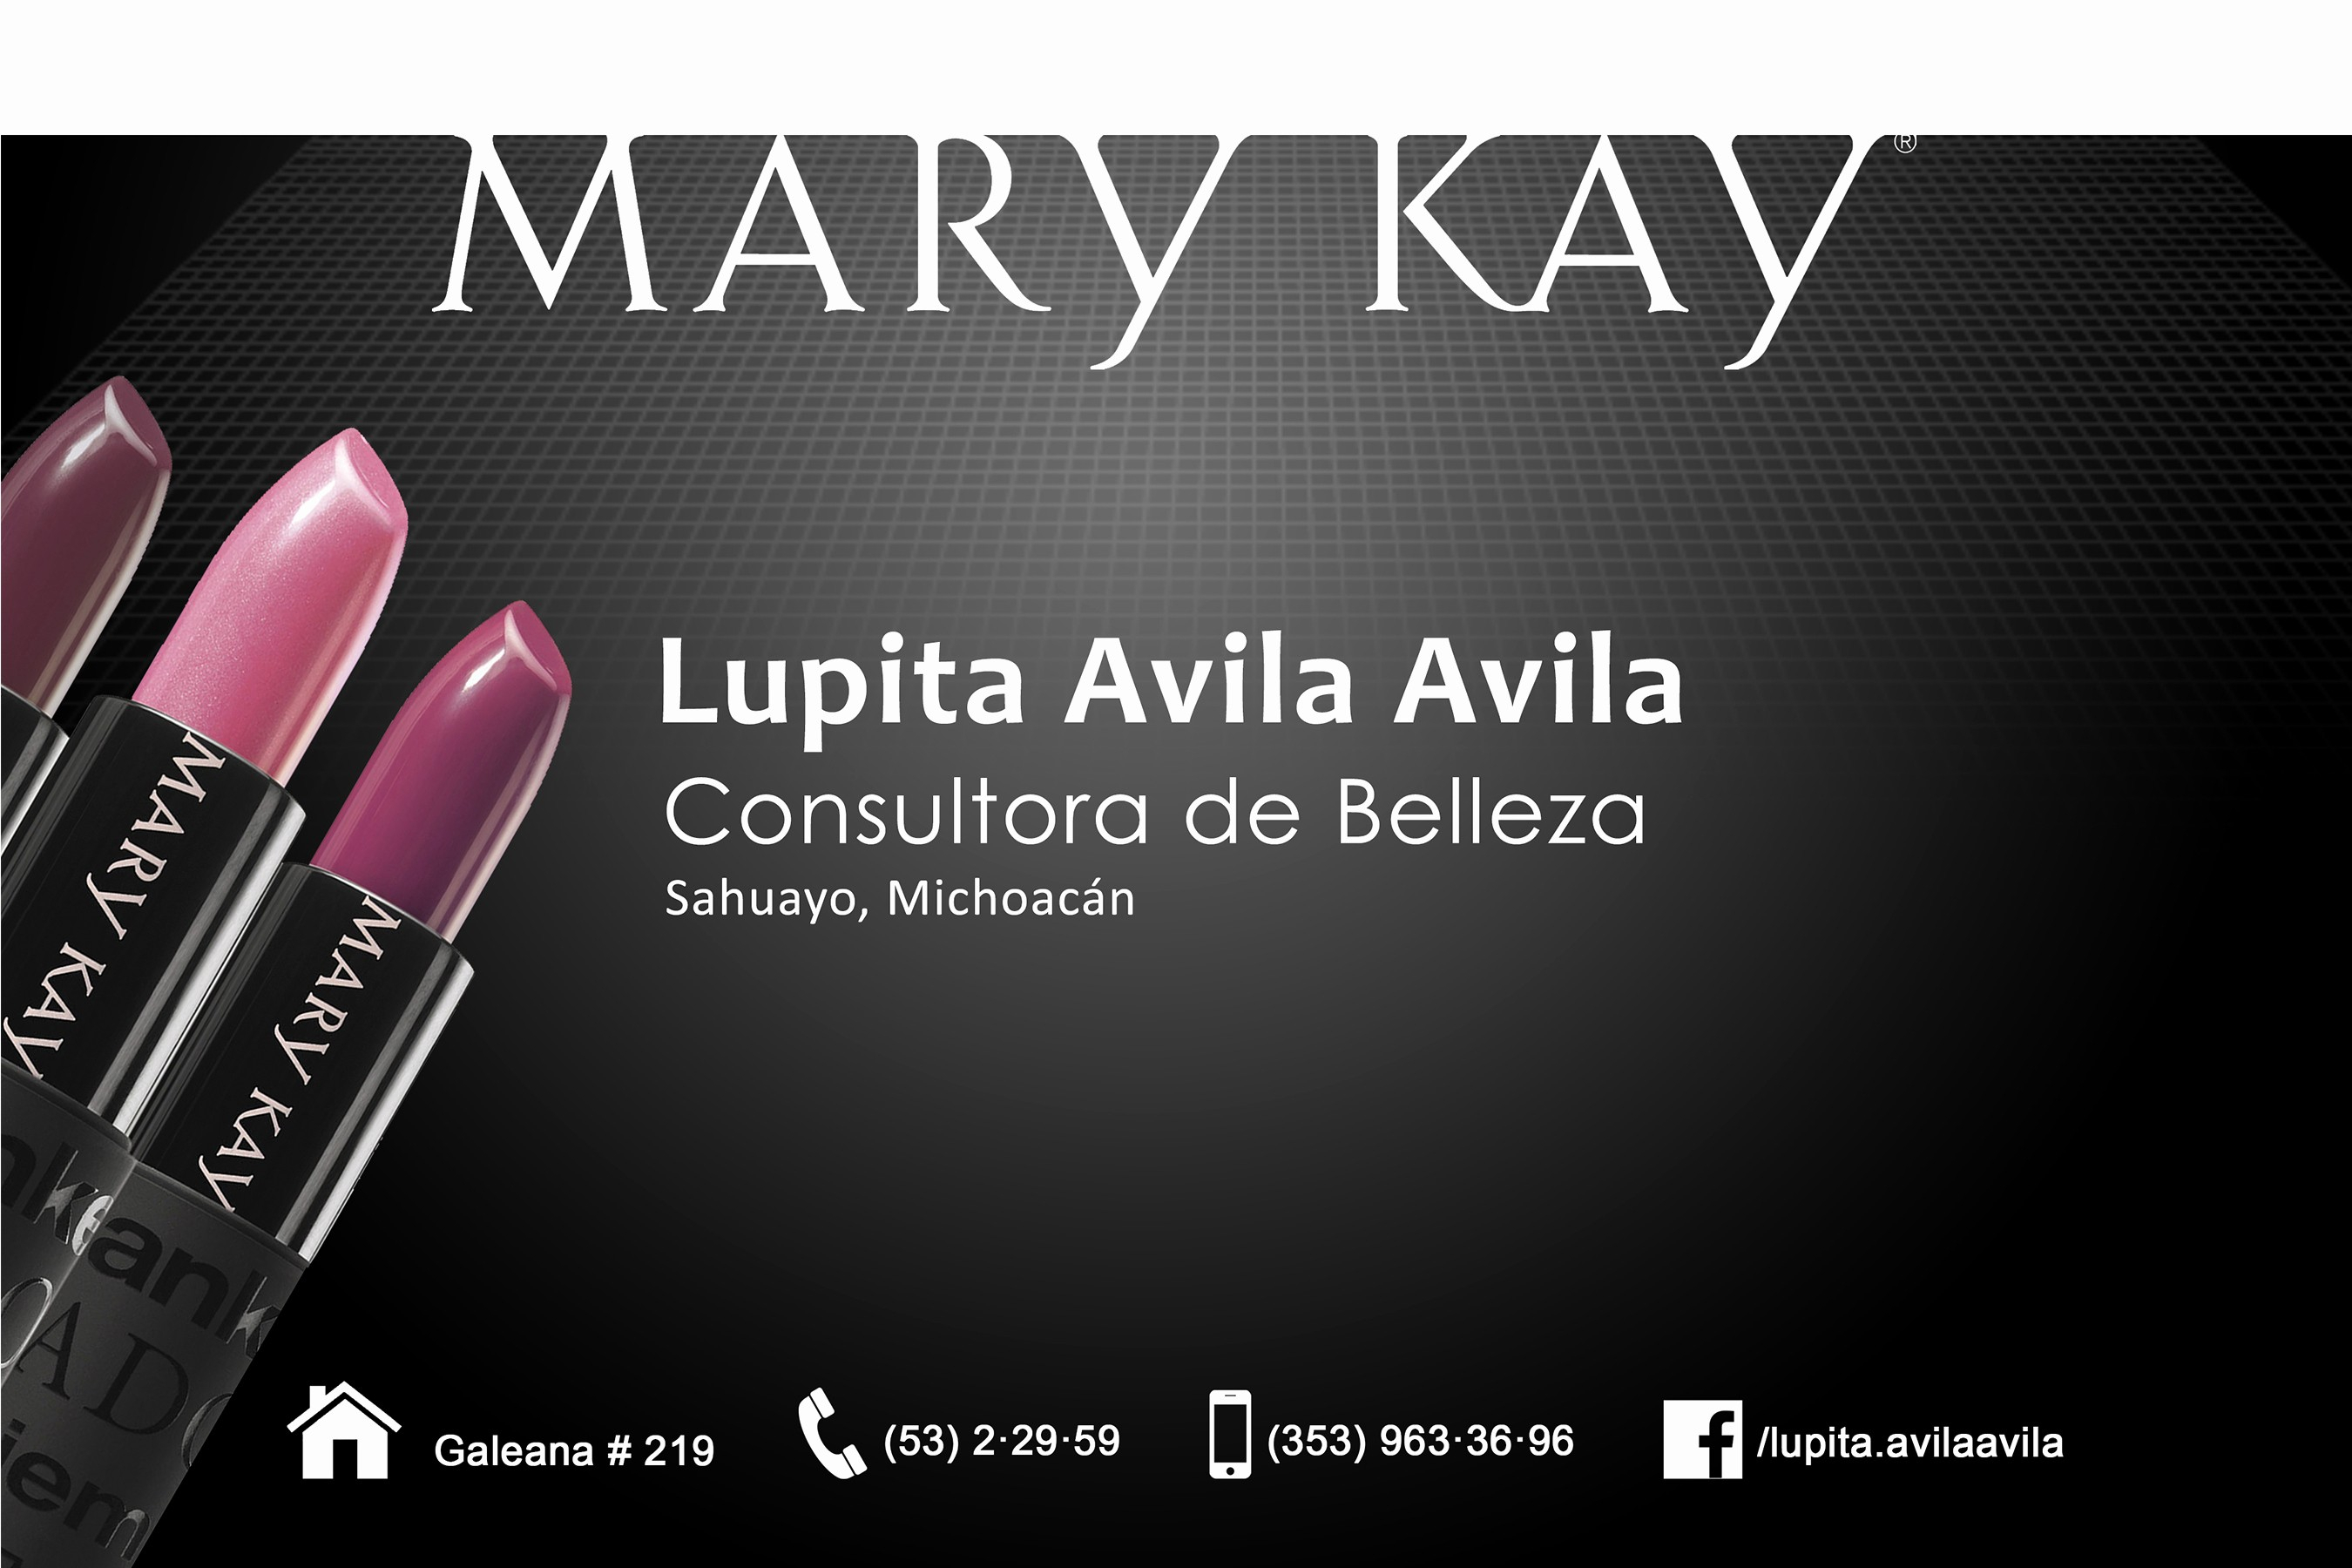 Mary Kay Business Card Template Free | Locksmithcovington Inside Mary Kay Business Cards Templates Free